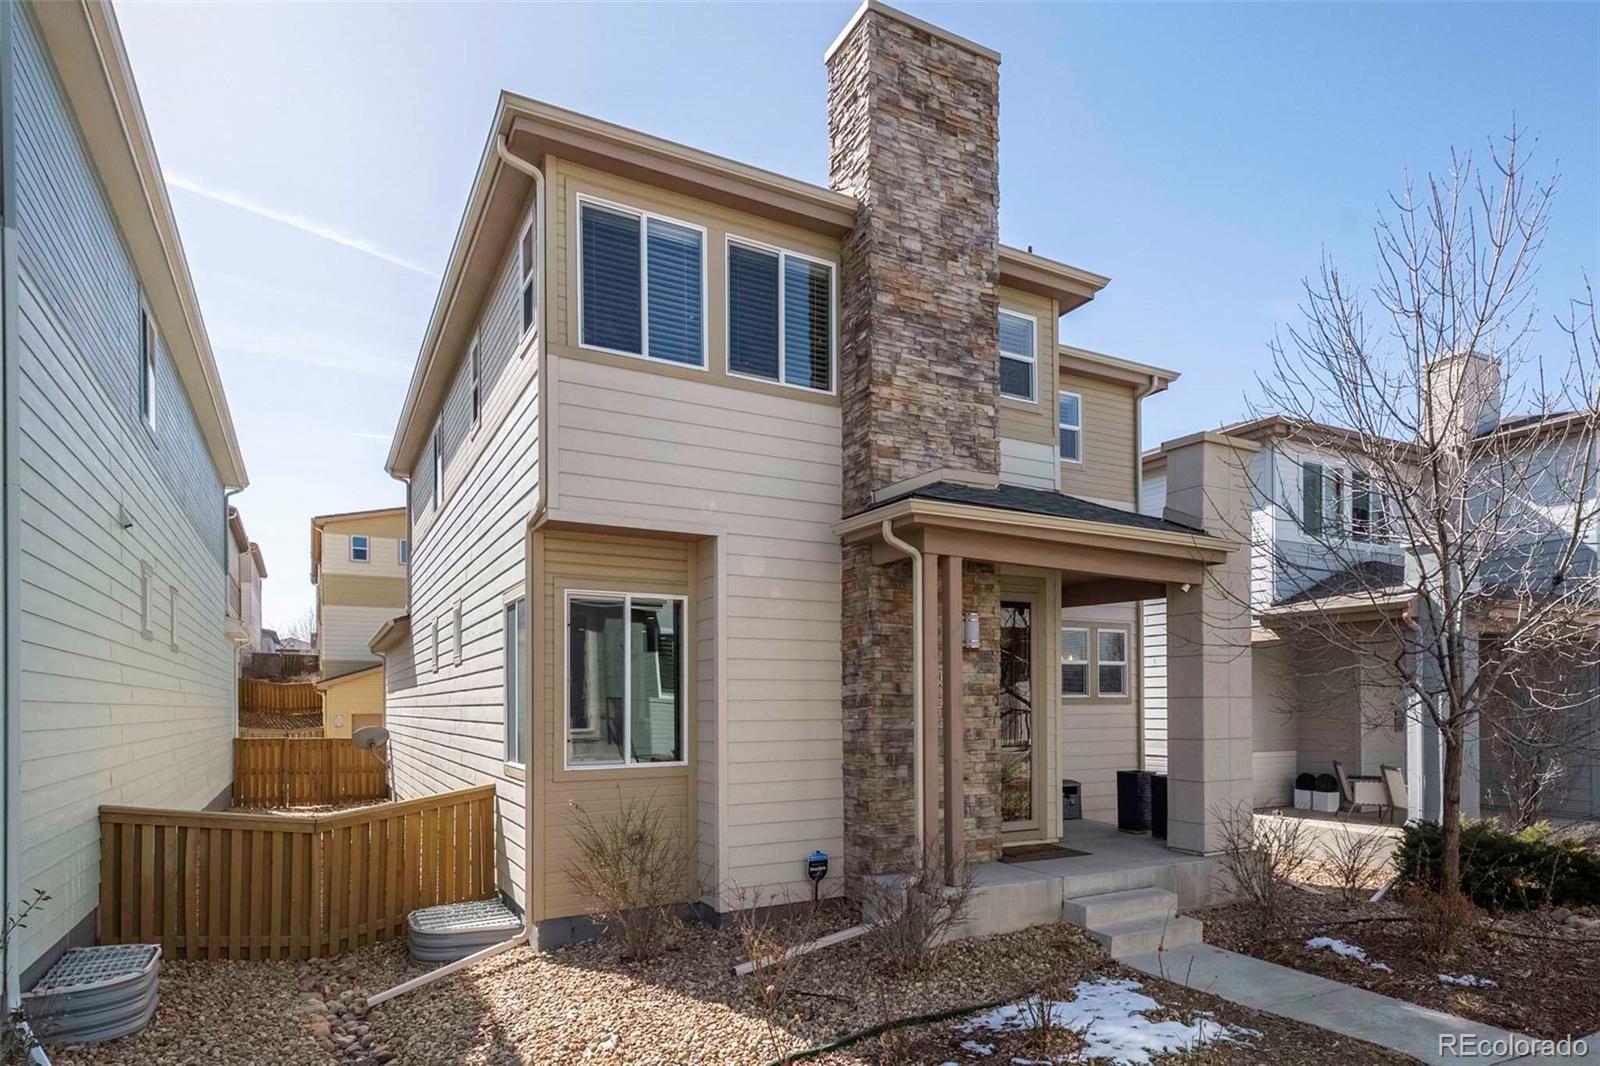 Report Image for 9652  Dunning Circle,Highlands Ranch, Colorado